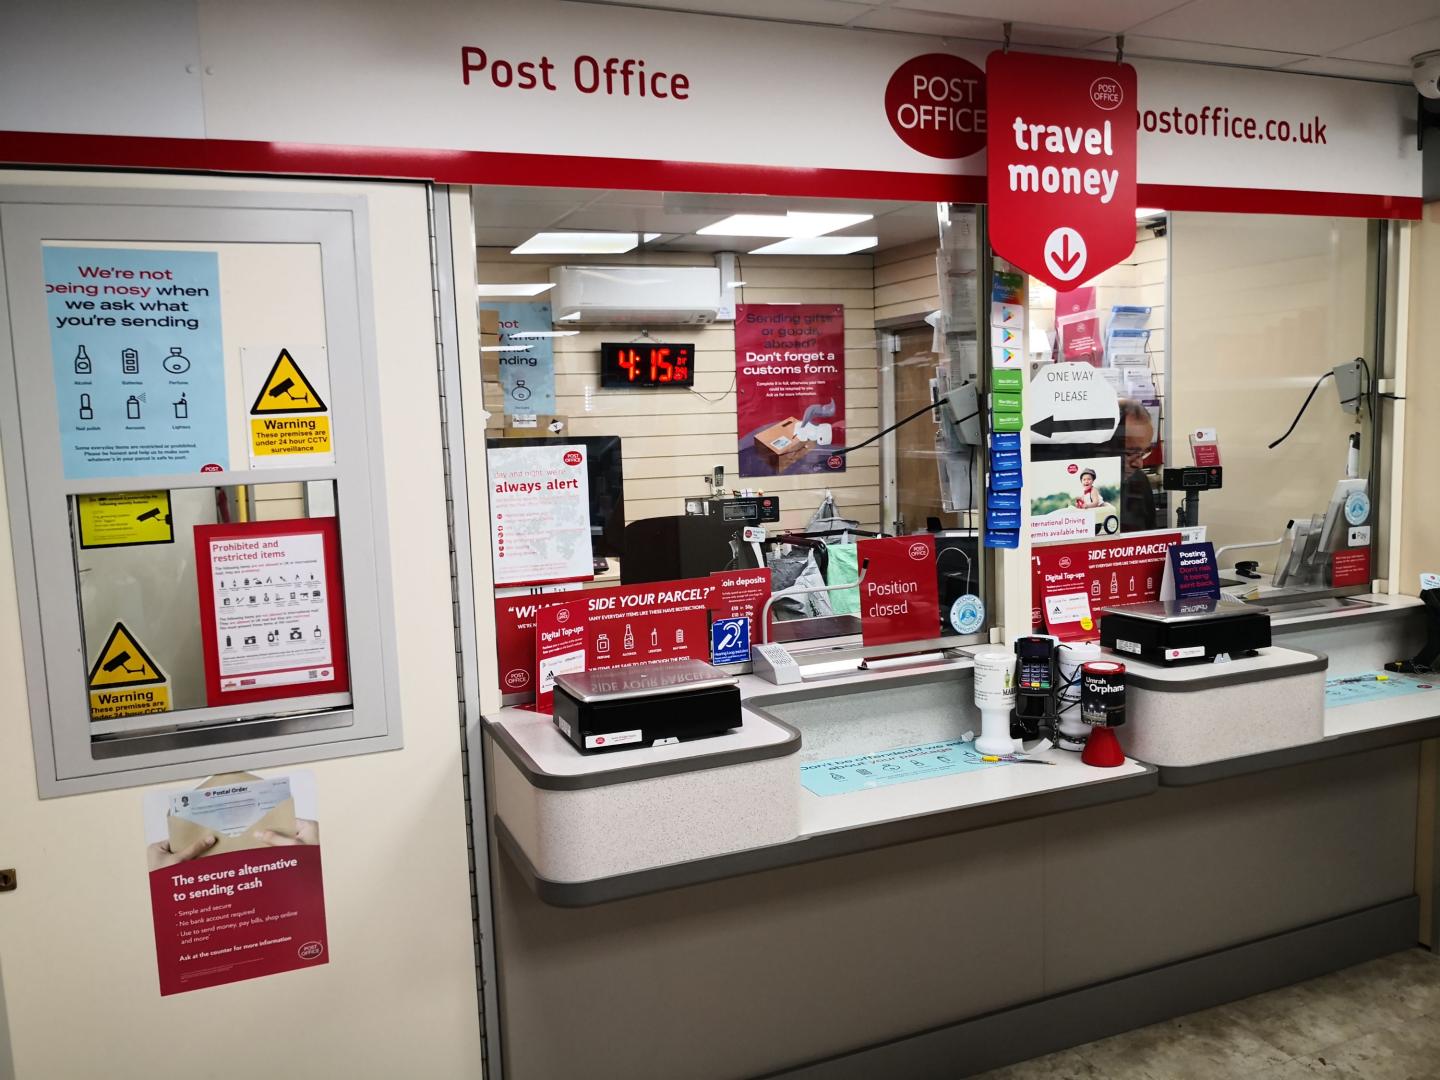 S35025G - Post Office Business for Sale in Leicester, Leicestershire -  Leasehold Lockup Main Post Office, Leicester :: Everett Masson & Furby